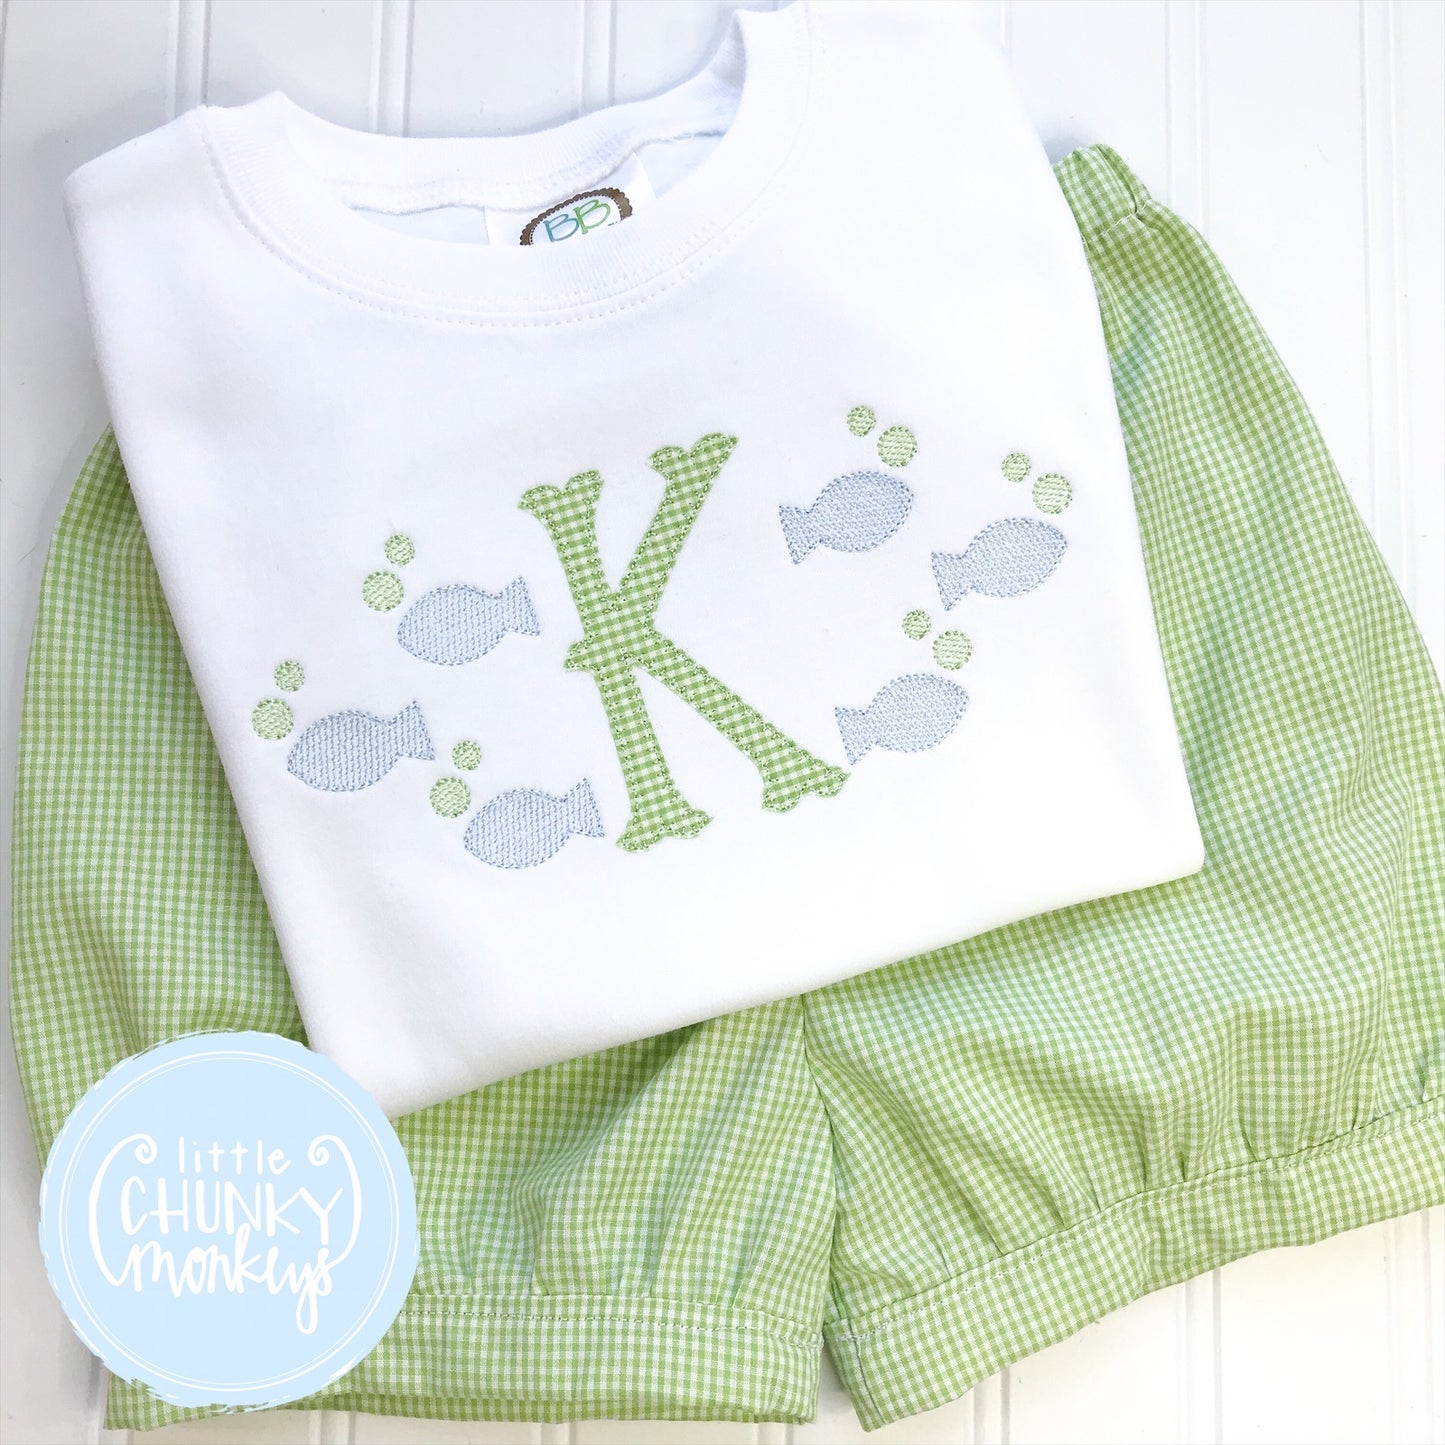 Boy Shirt - Fish Frame with Applique Initial